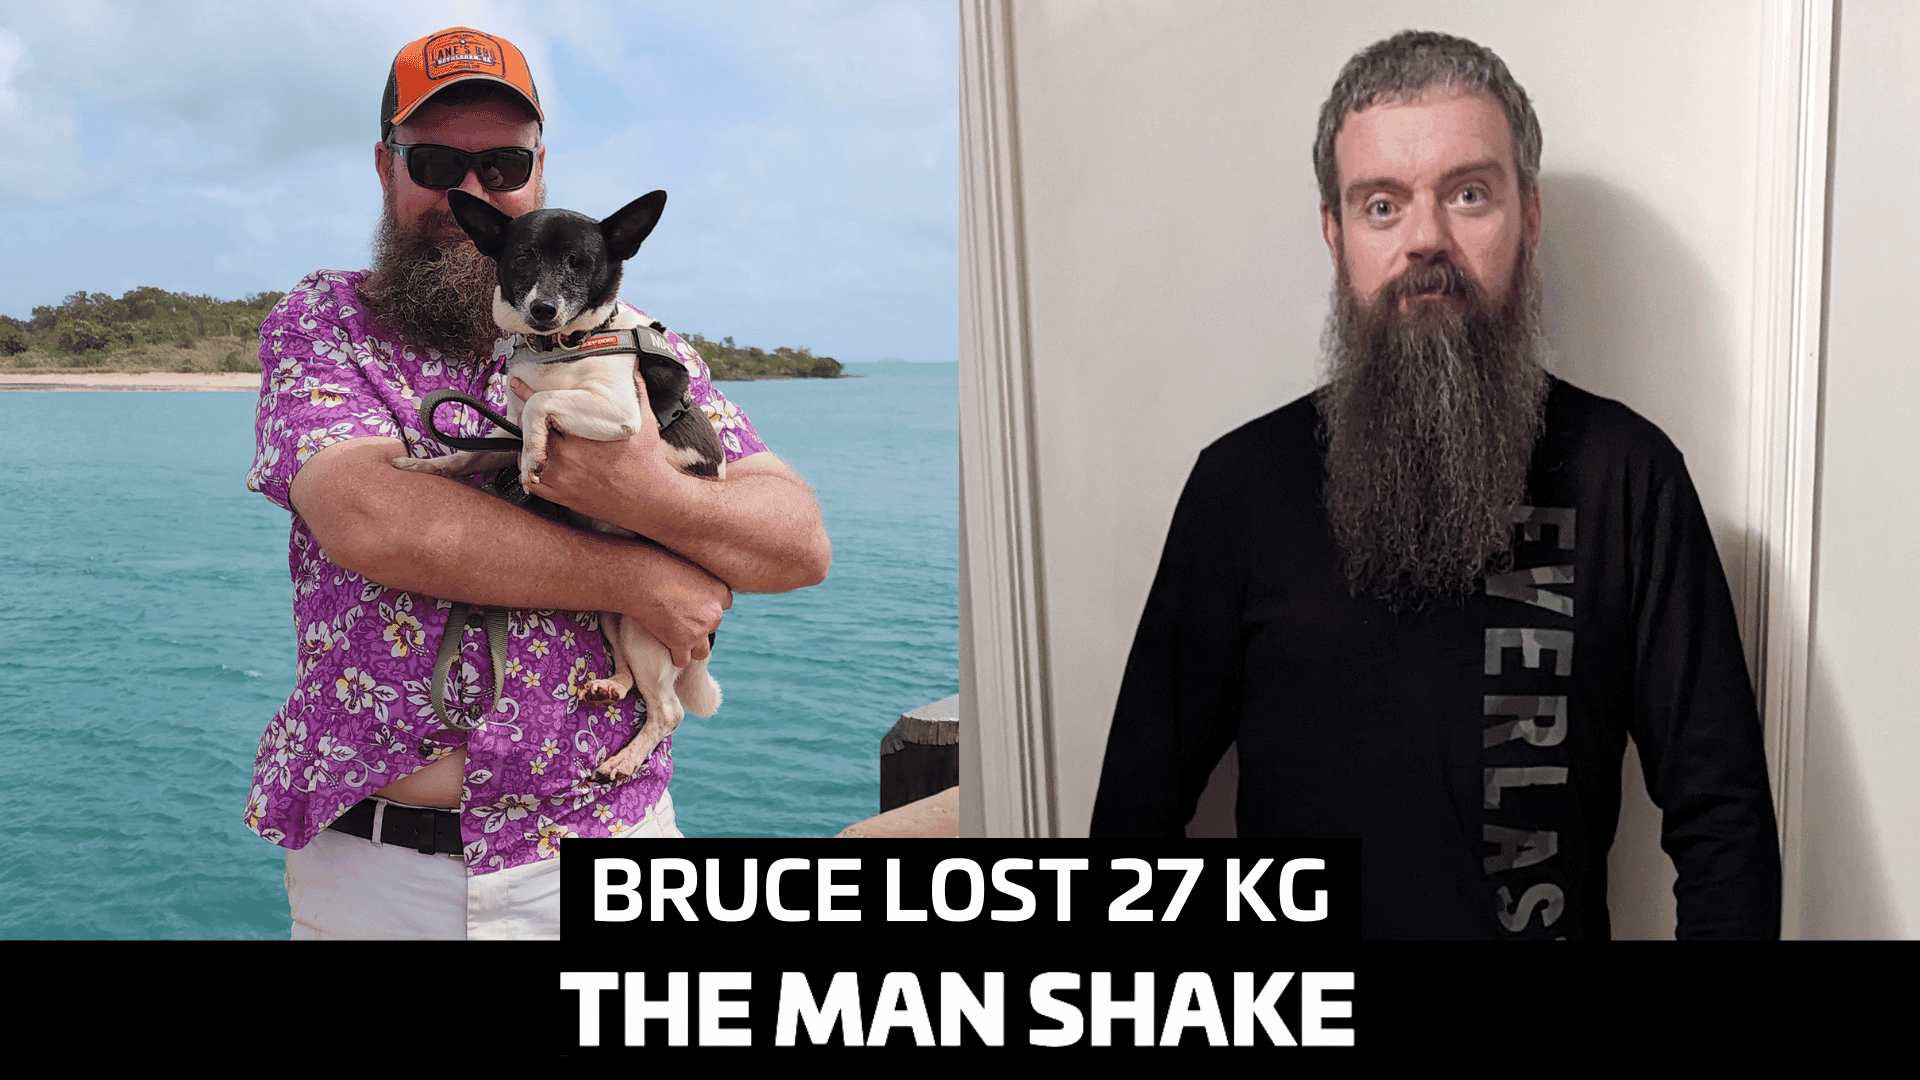 Bruce wanted to change his life around, so he lost 27.6kgs!